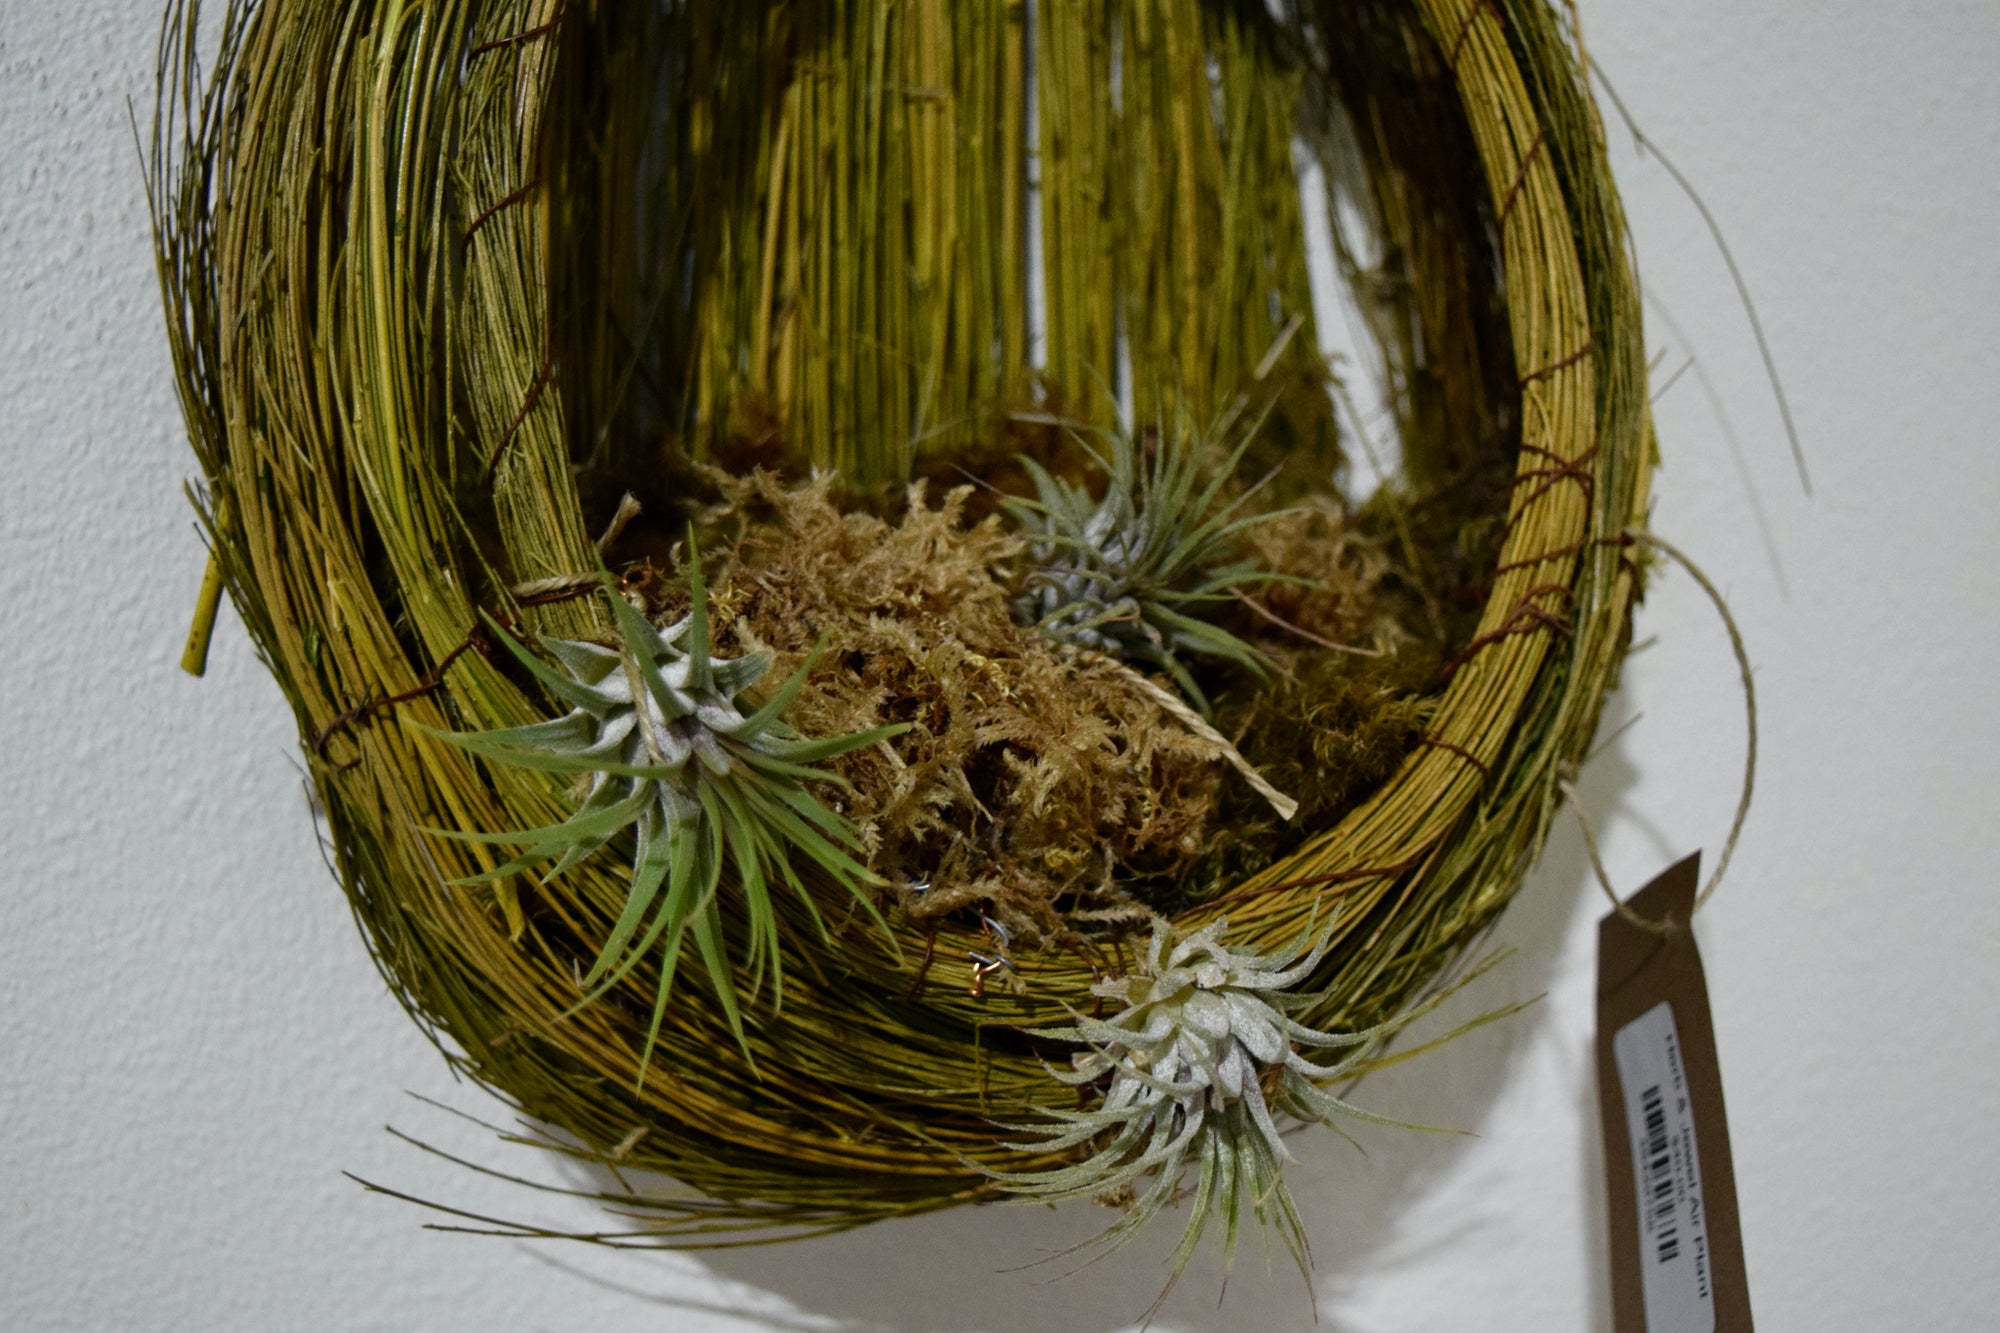 A woven basket with moss and air plants inside.